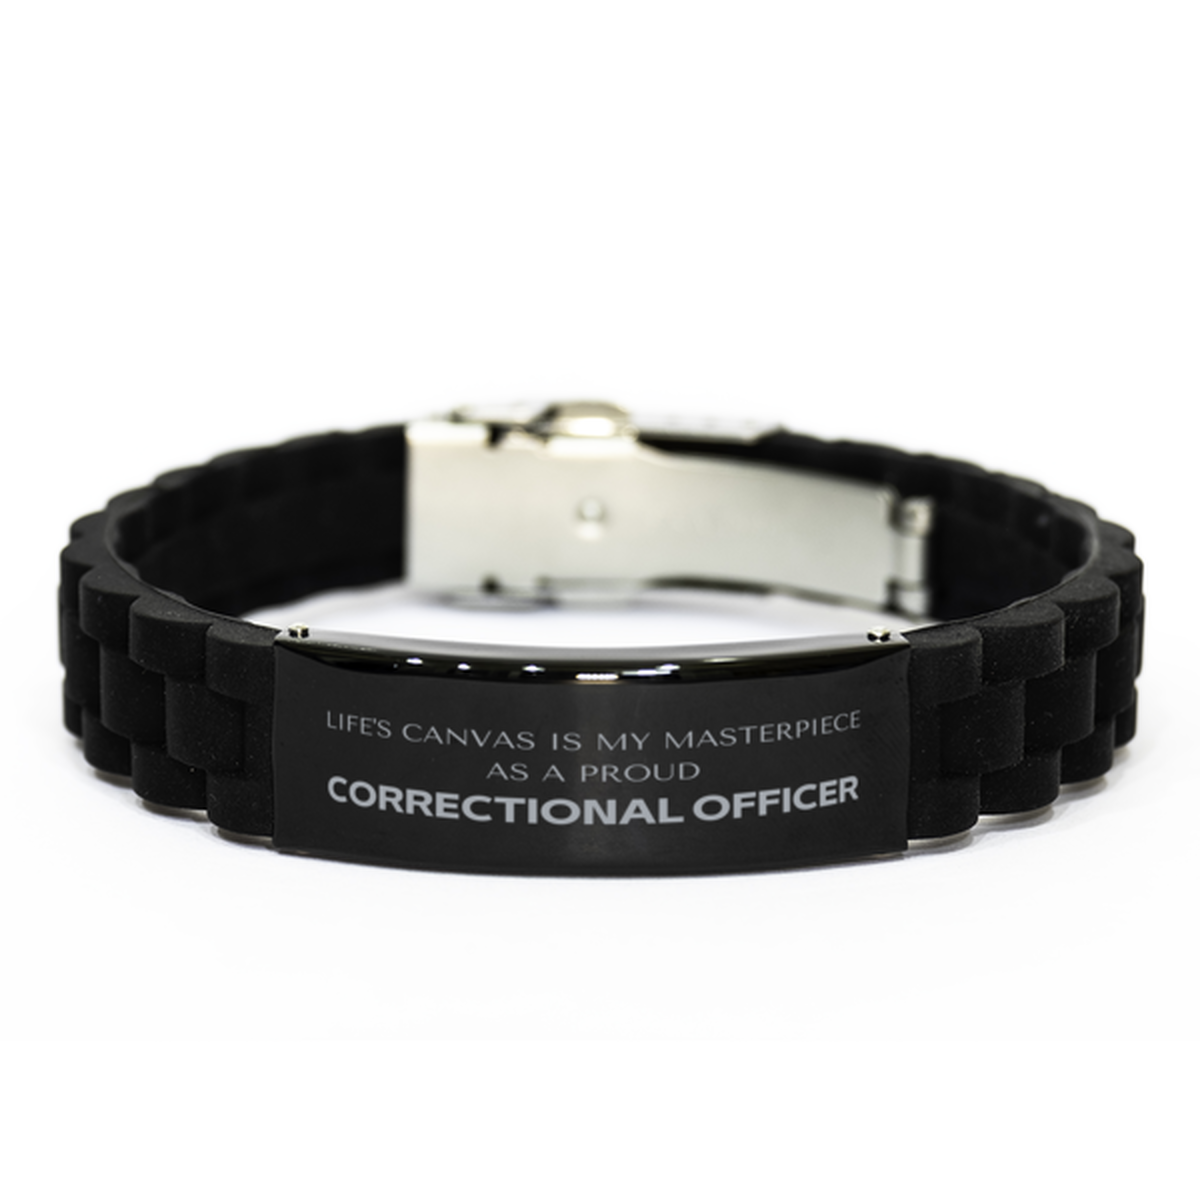 Proud Correctional Officer Gifts, Life's canvas is my masterpiece, Epic Birthday Christmas Unique Black Glidelock Clasp Bracelet For Correctional Officer, Coworkers, Men, Women, Friends